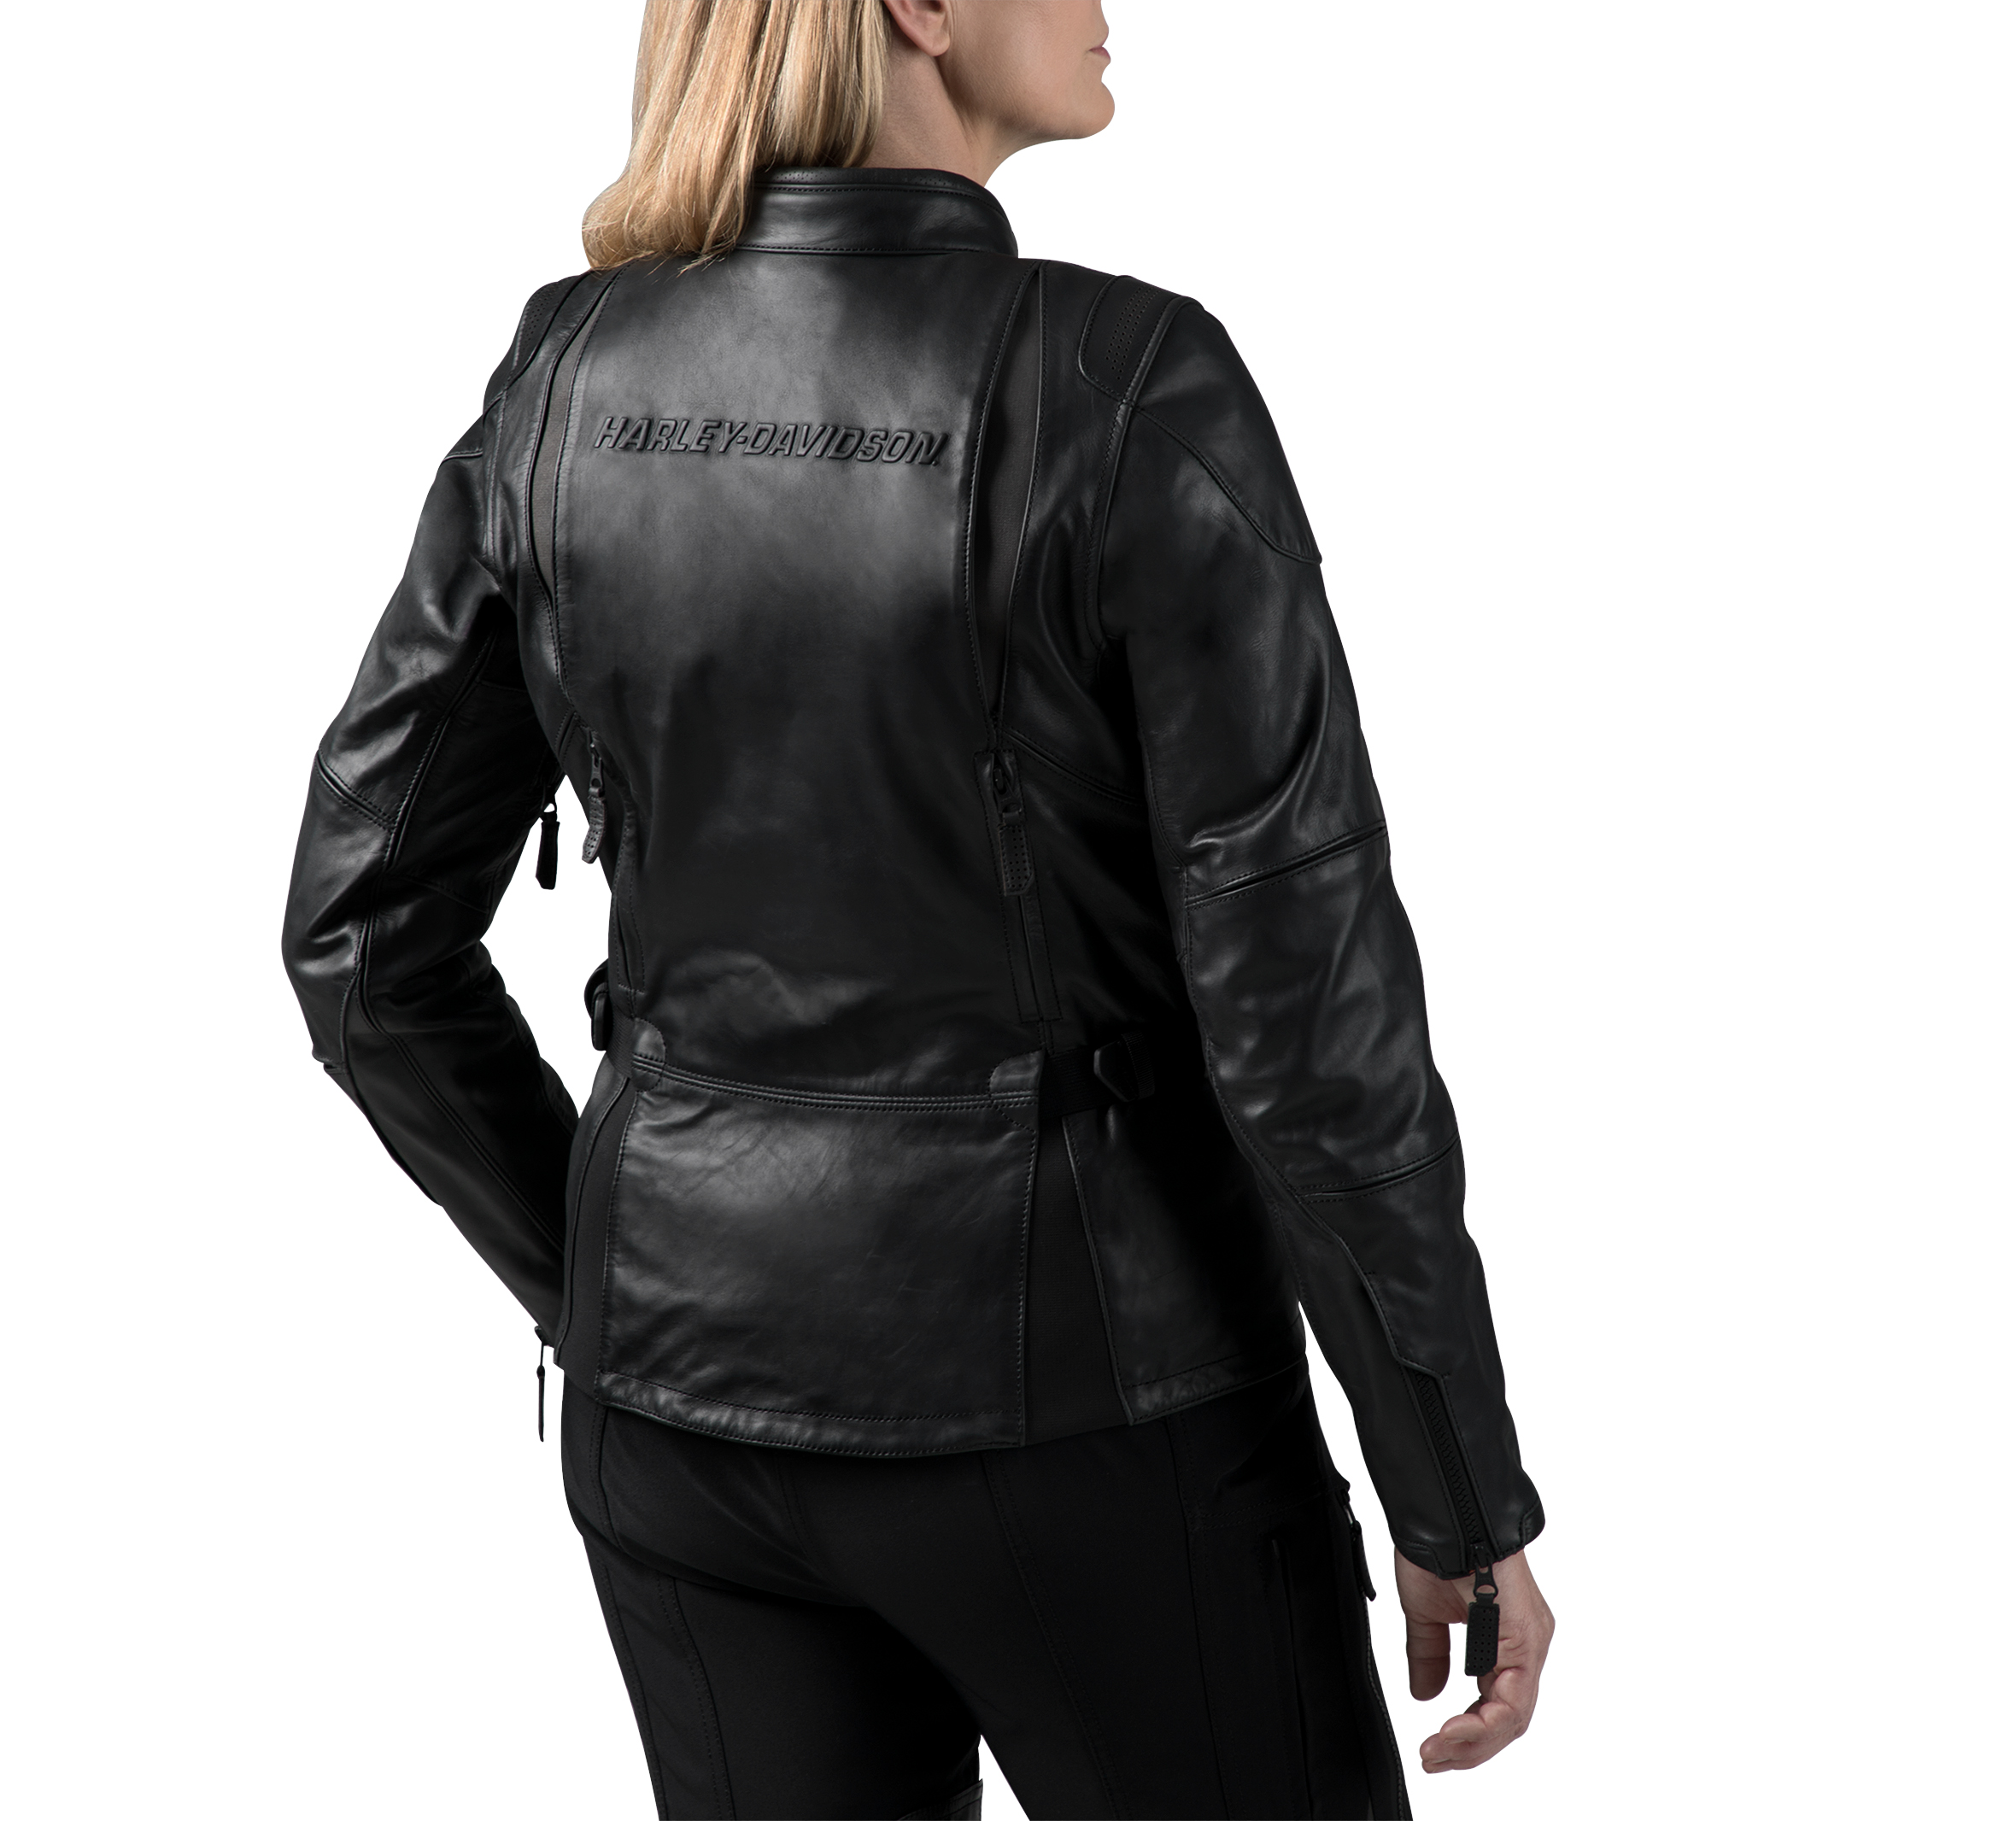 FXRG® MIDWEIGHT LEATHER JACKET